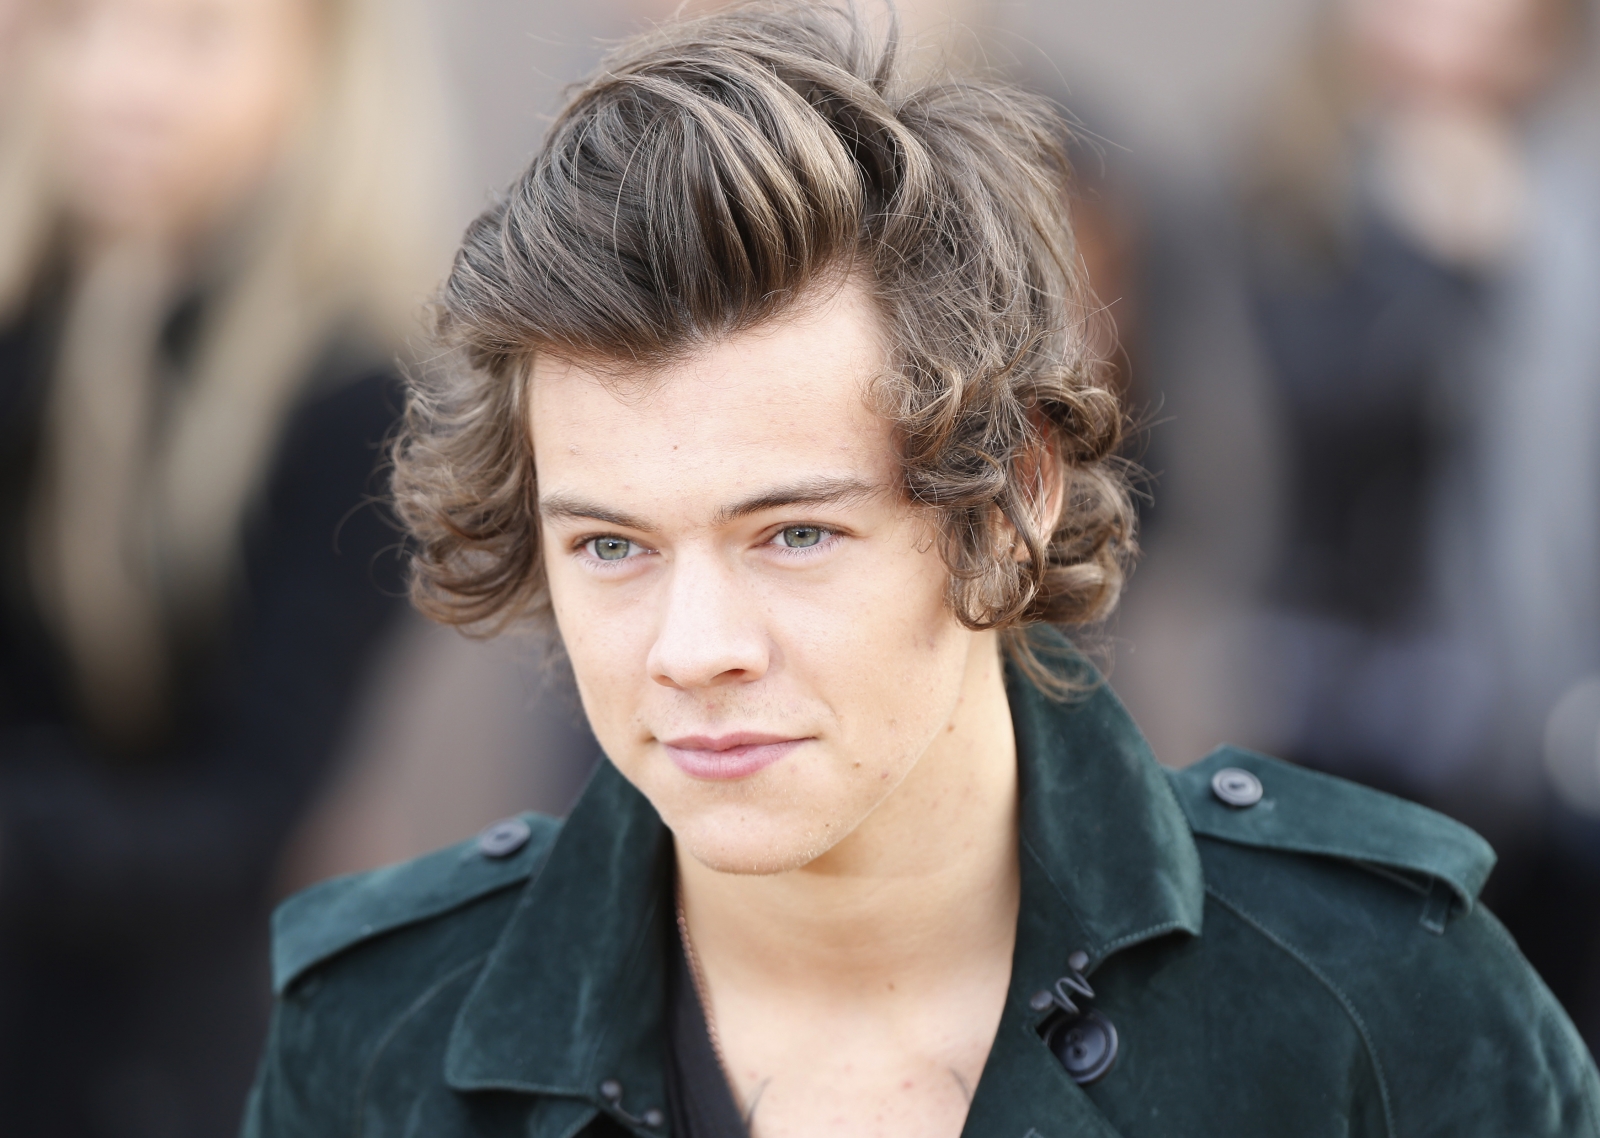 Harry Styles is fuming as Zayn Malik continues to slam One Direction